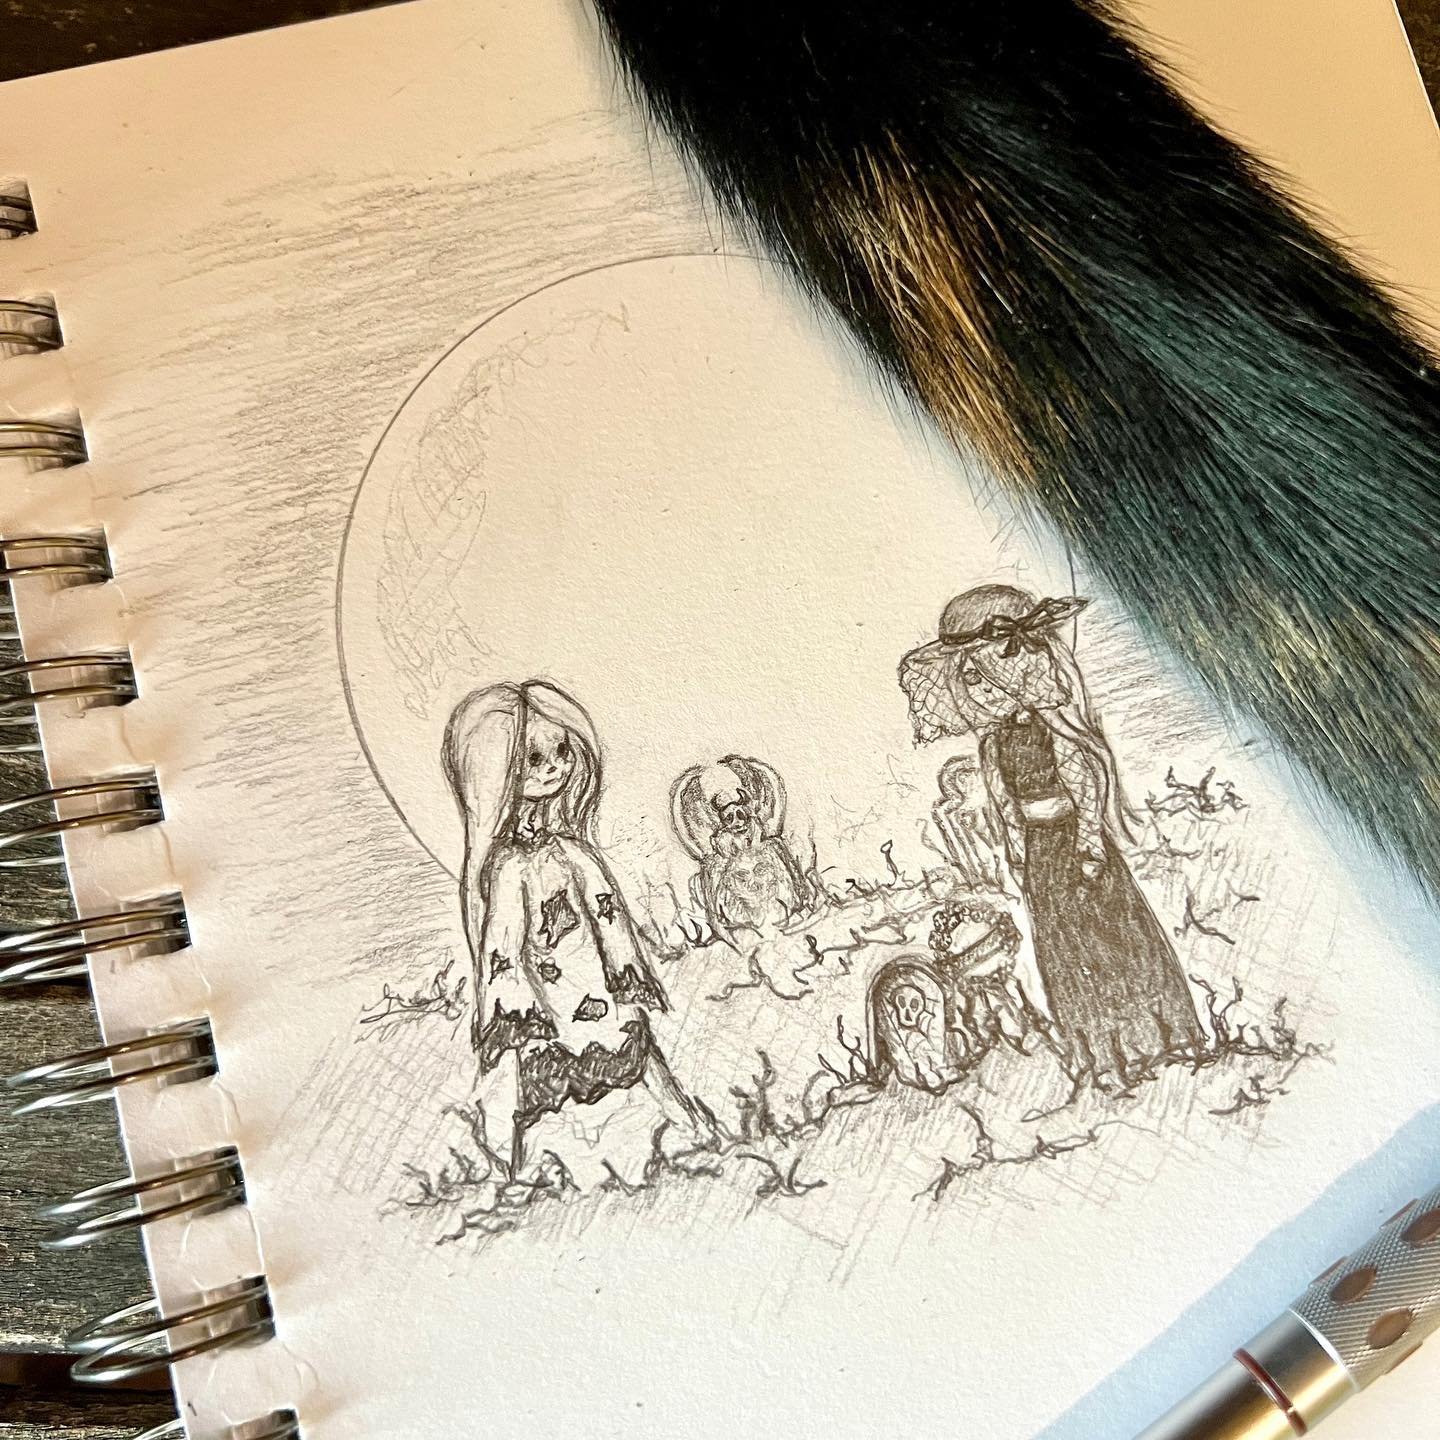 Mab&rsquo;s Drawlloween Day 31 Part 2 - Rest in Peace
A quick little drawing to go with the photo I did for todays prompt, along with one of the original unedited photos 

#mdwc23d31 #mdwc23 #mabsdrawlloweenclub #mabsdrawlloweenclub2023 #drawlloween